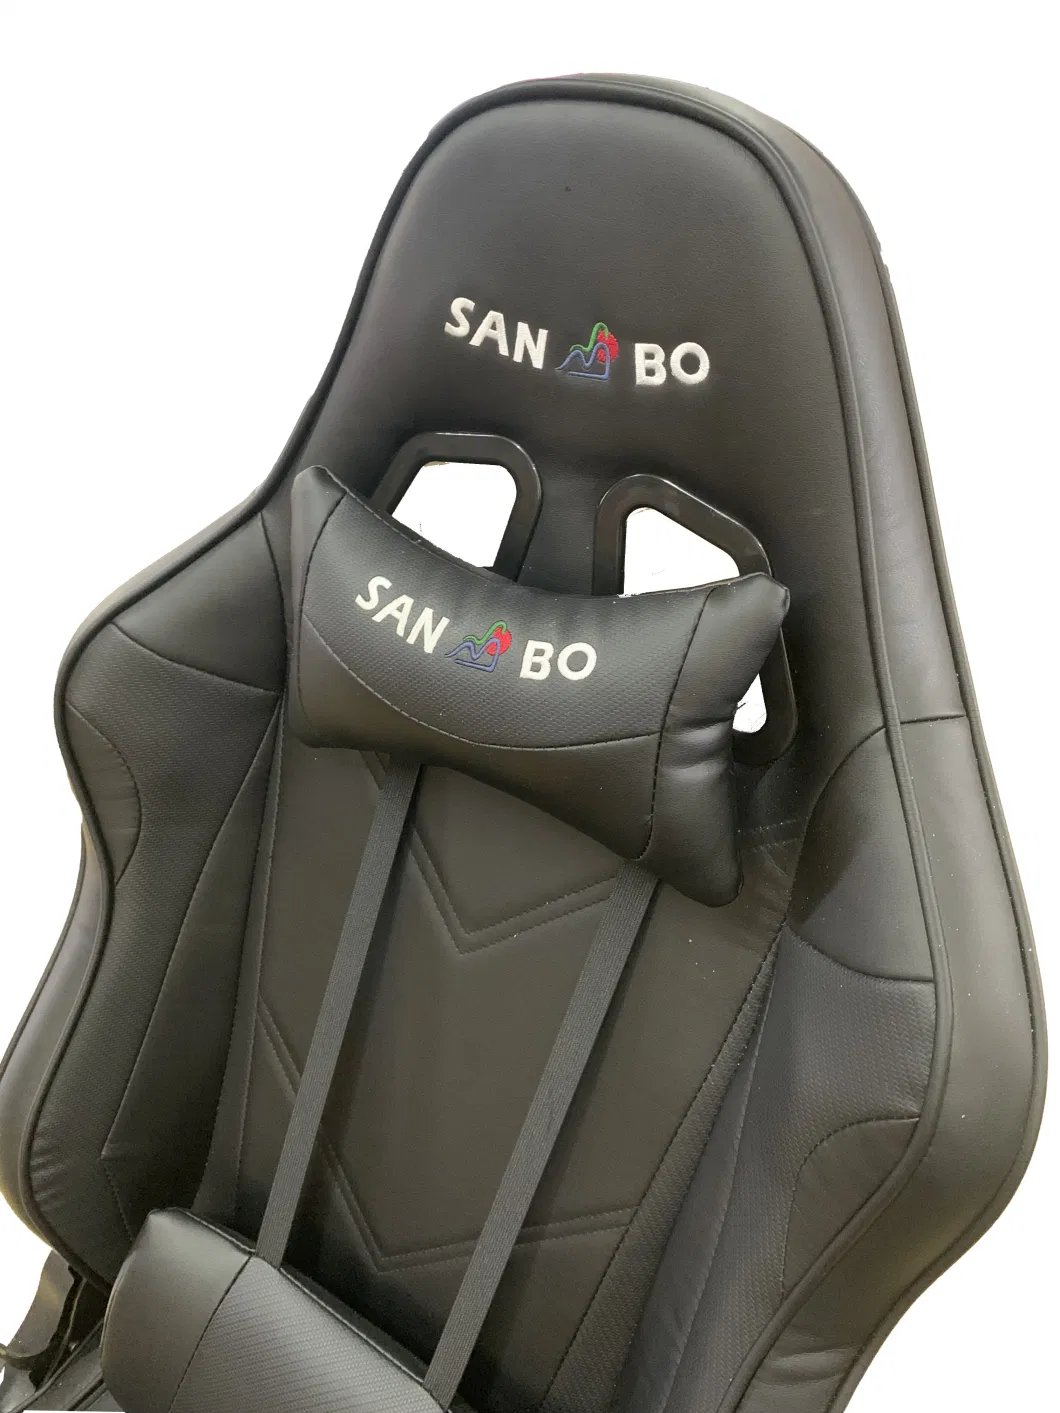 Manually Adjustable Racer Sport Gaming Chair for Computer Game, Office